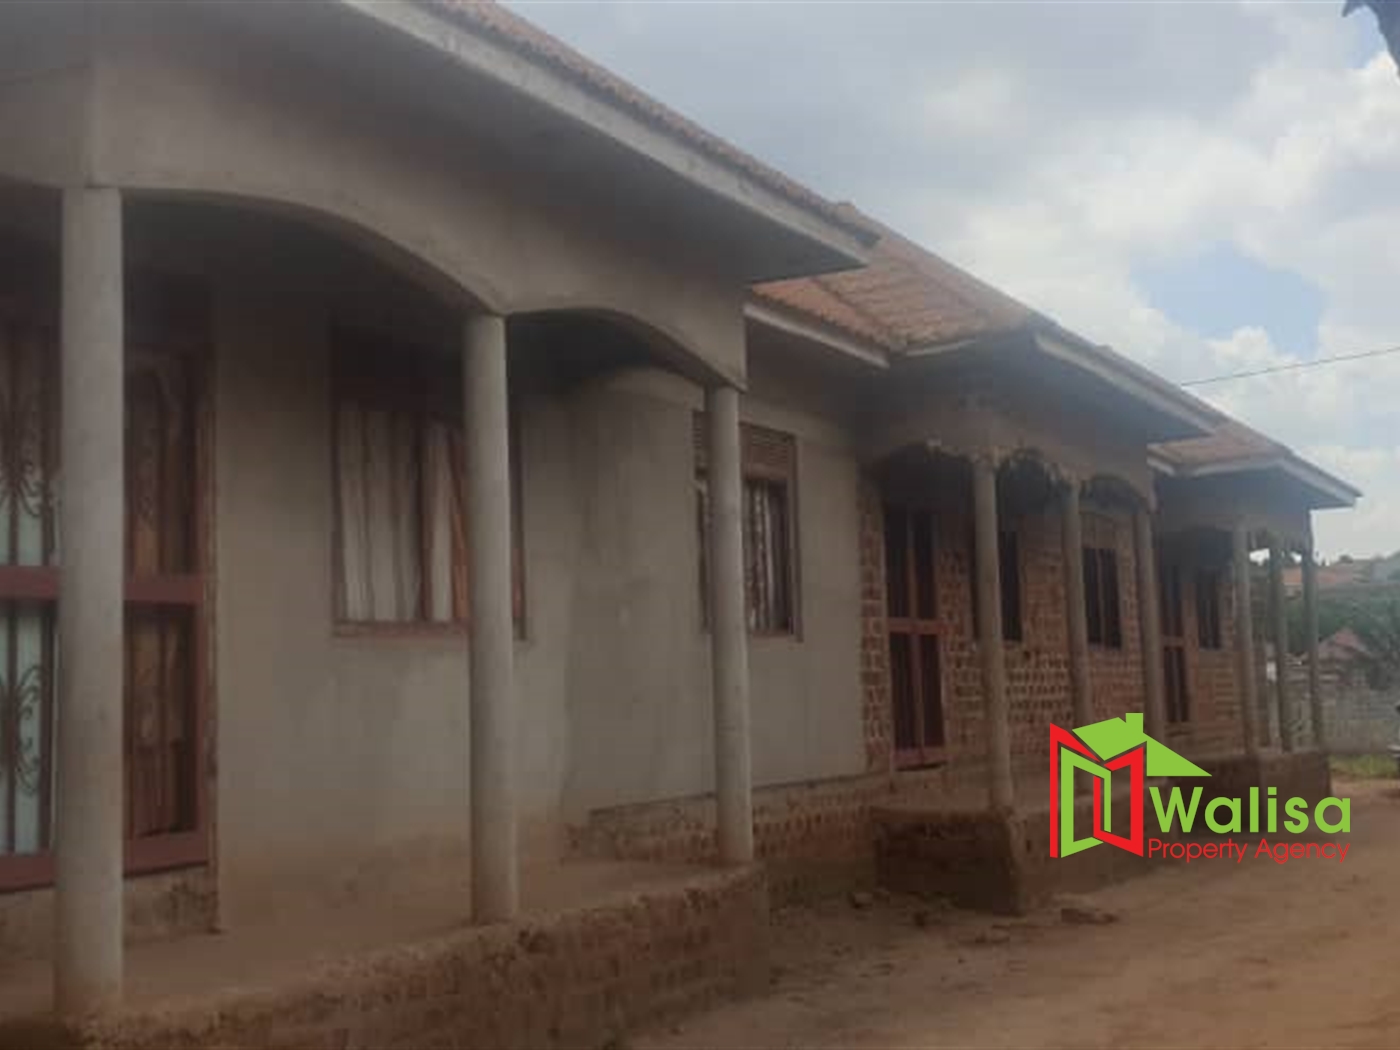 Rental units for sale in Nammere Wakiso